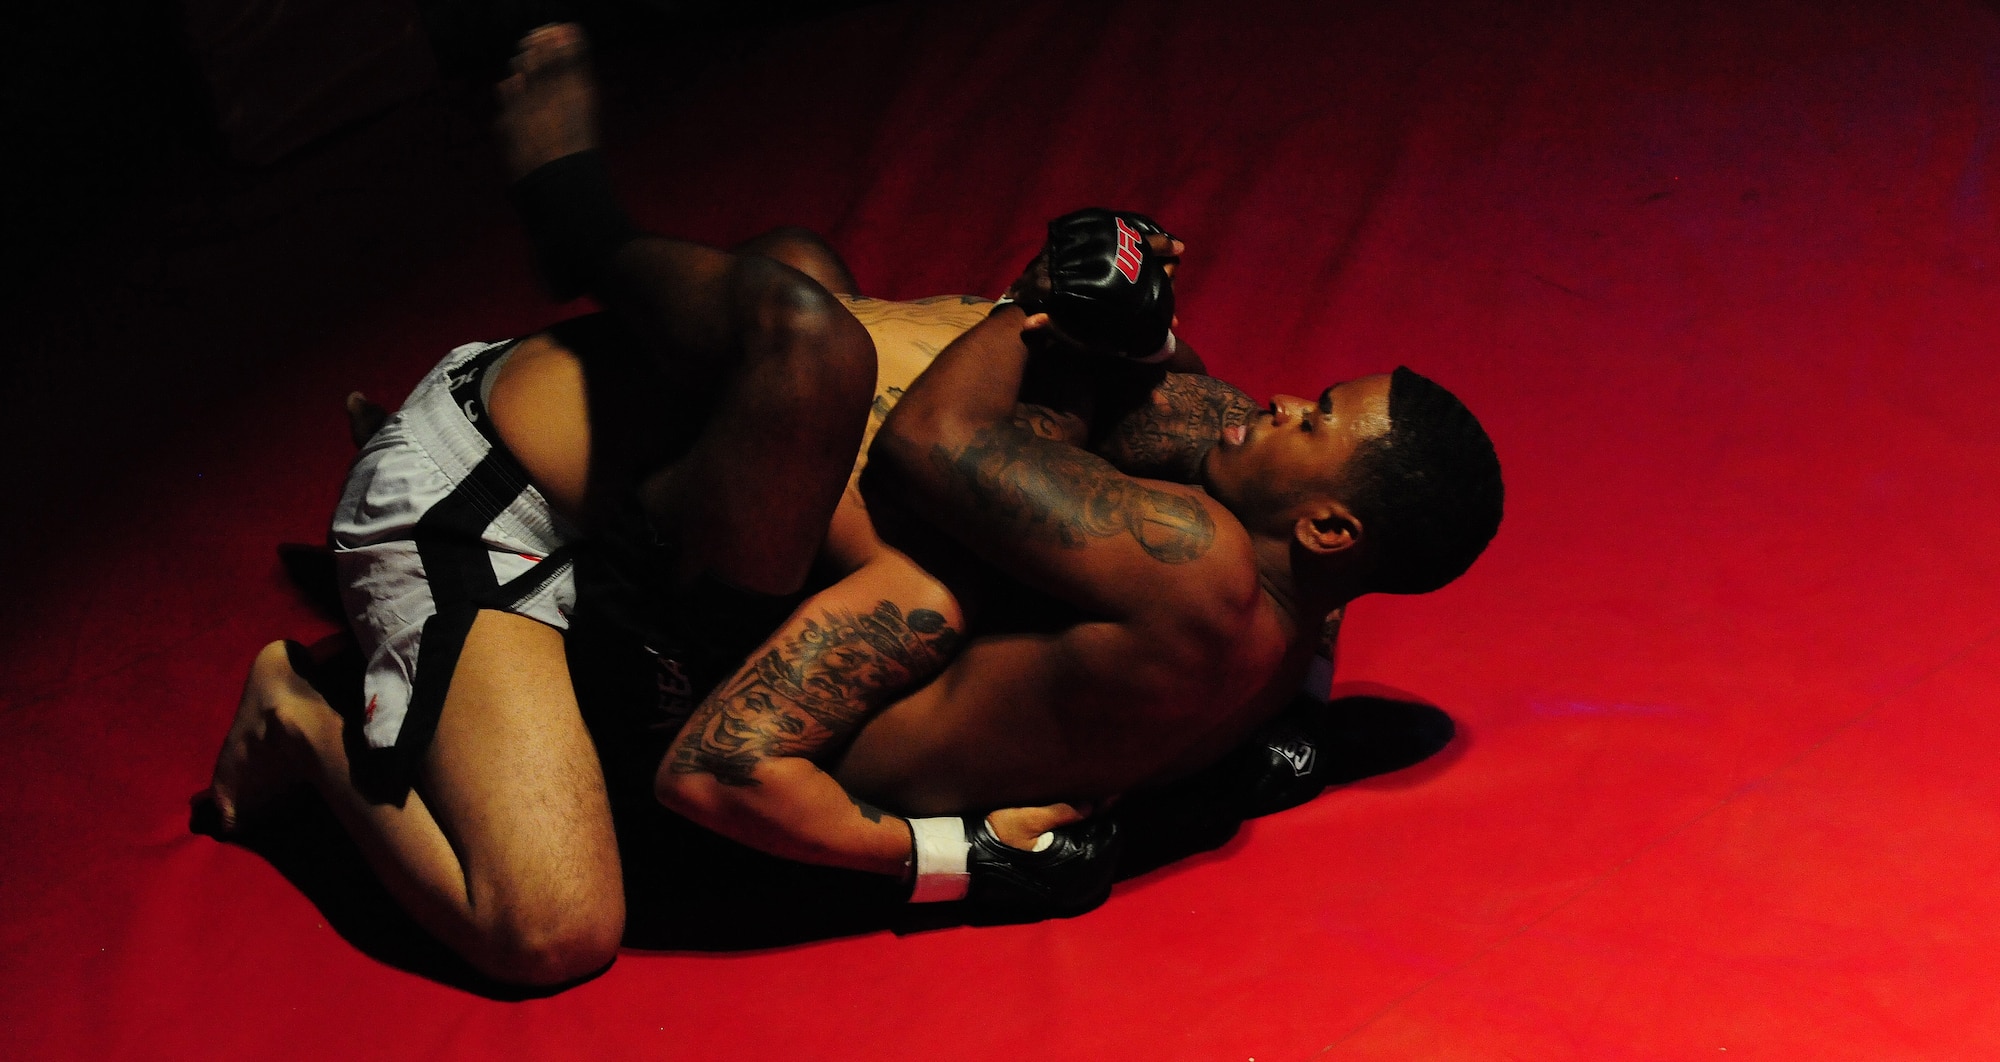 Steven Dickerson, bottom, 509th Maintenance Squadron, performs a grappling technique on Chalen Chaney, during an amateur mixed martial arts match at Bottoms Up in Sedalia, Mo., May 18, 2013. Mixed martial arts blends a variety of techniques from other combat sports including wrestling, boxing, judo, kung fu, mao-thai and taekwondo. (U.S. Air Force photo by Staff Sgt. Nick Wilson/Released)